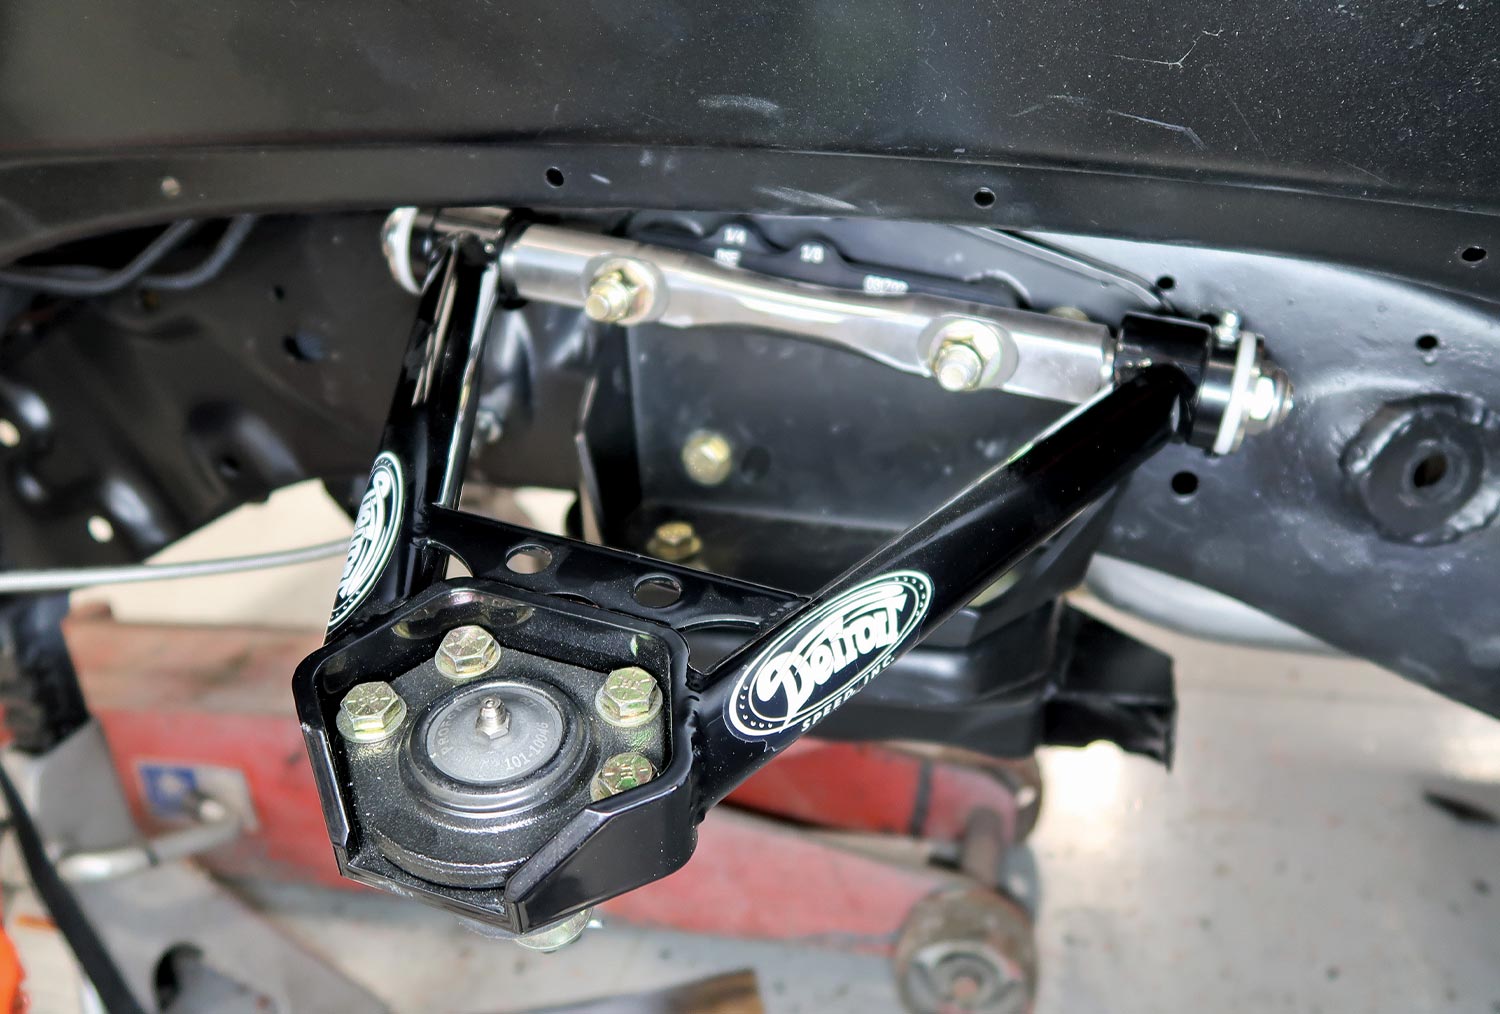 with the mounting brackets bolted in place the upper control arms are installed